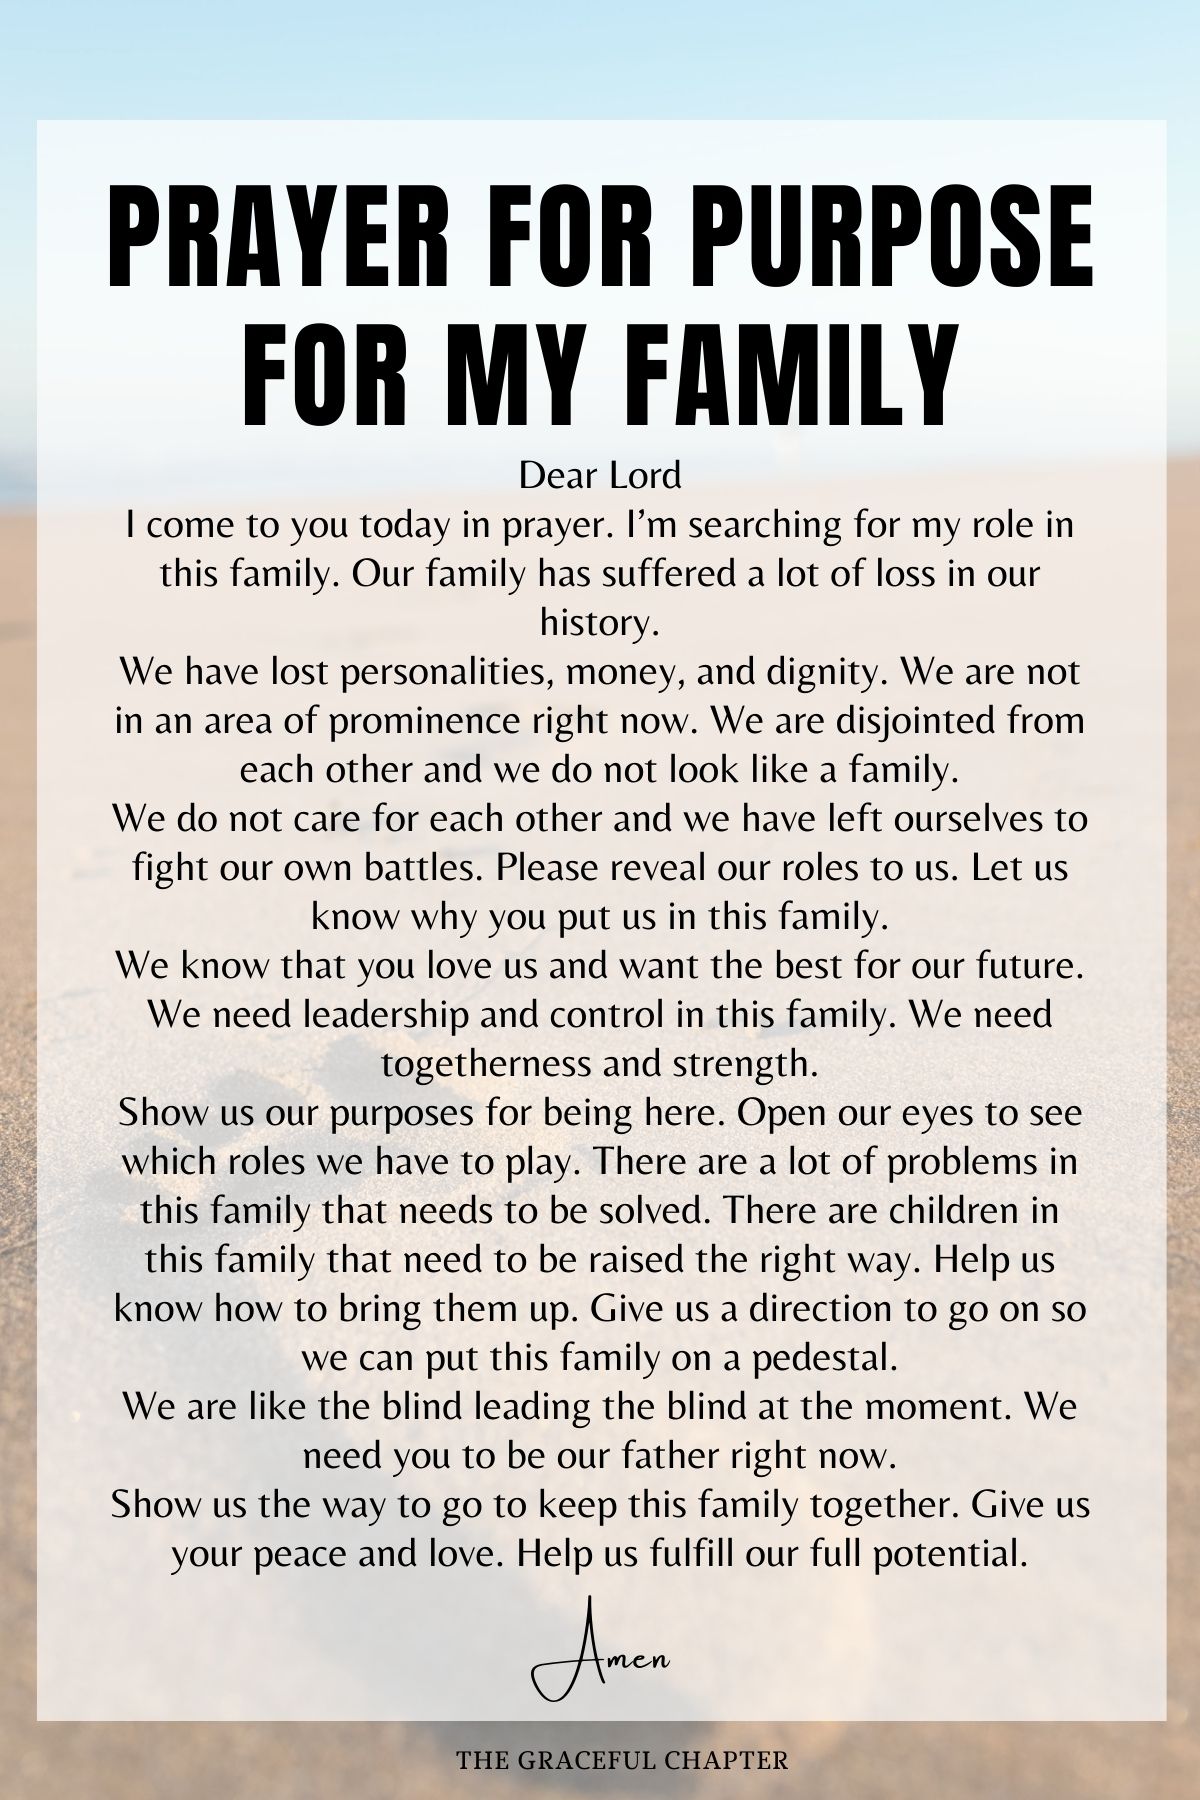 Prayer for Purpose for my Family